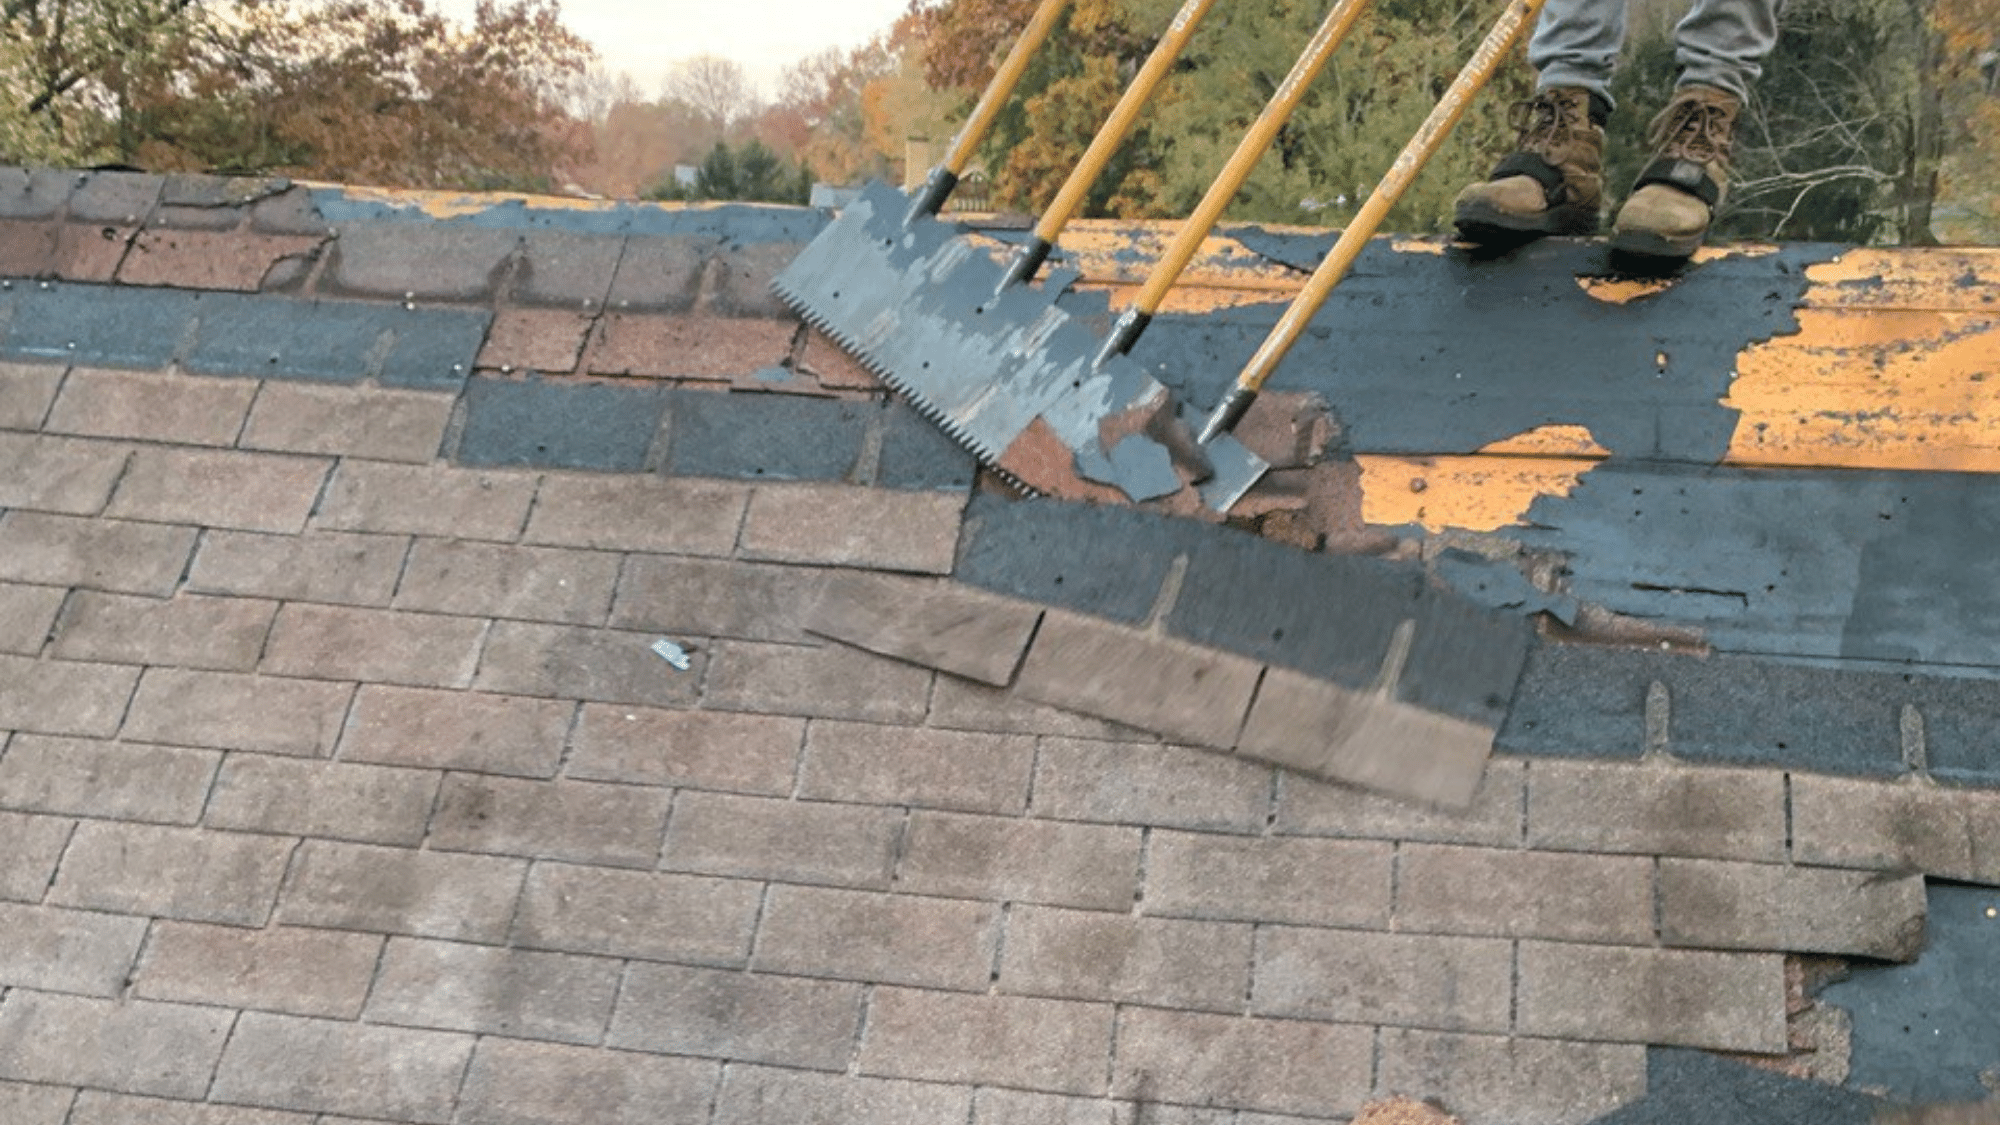 Strasburg Roof Replacements - Complete Tear Off